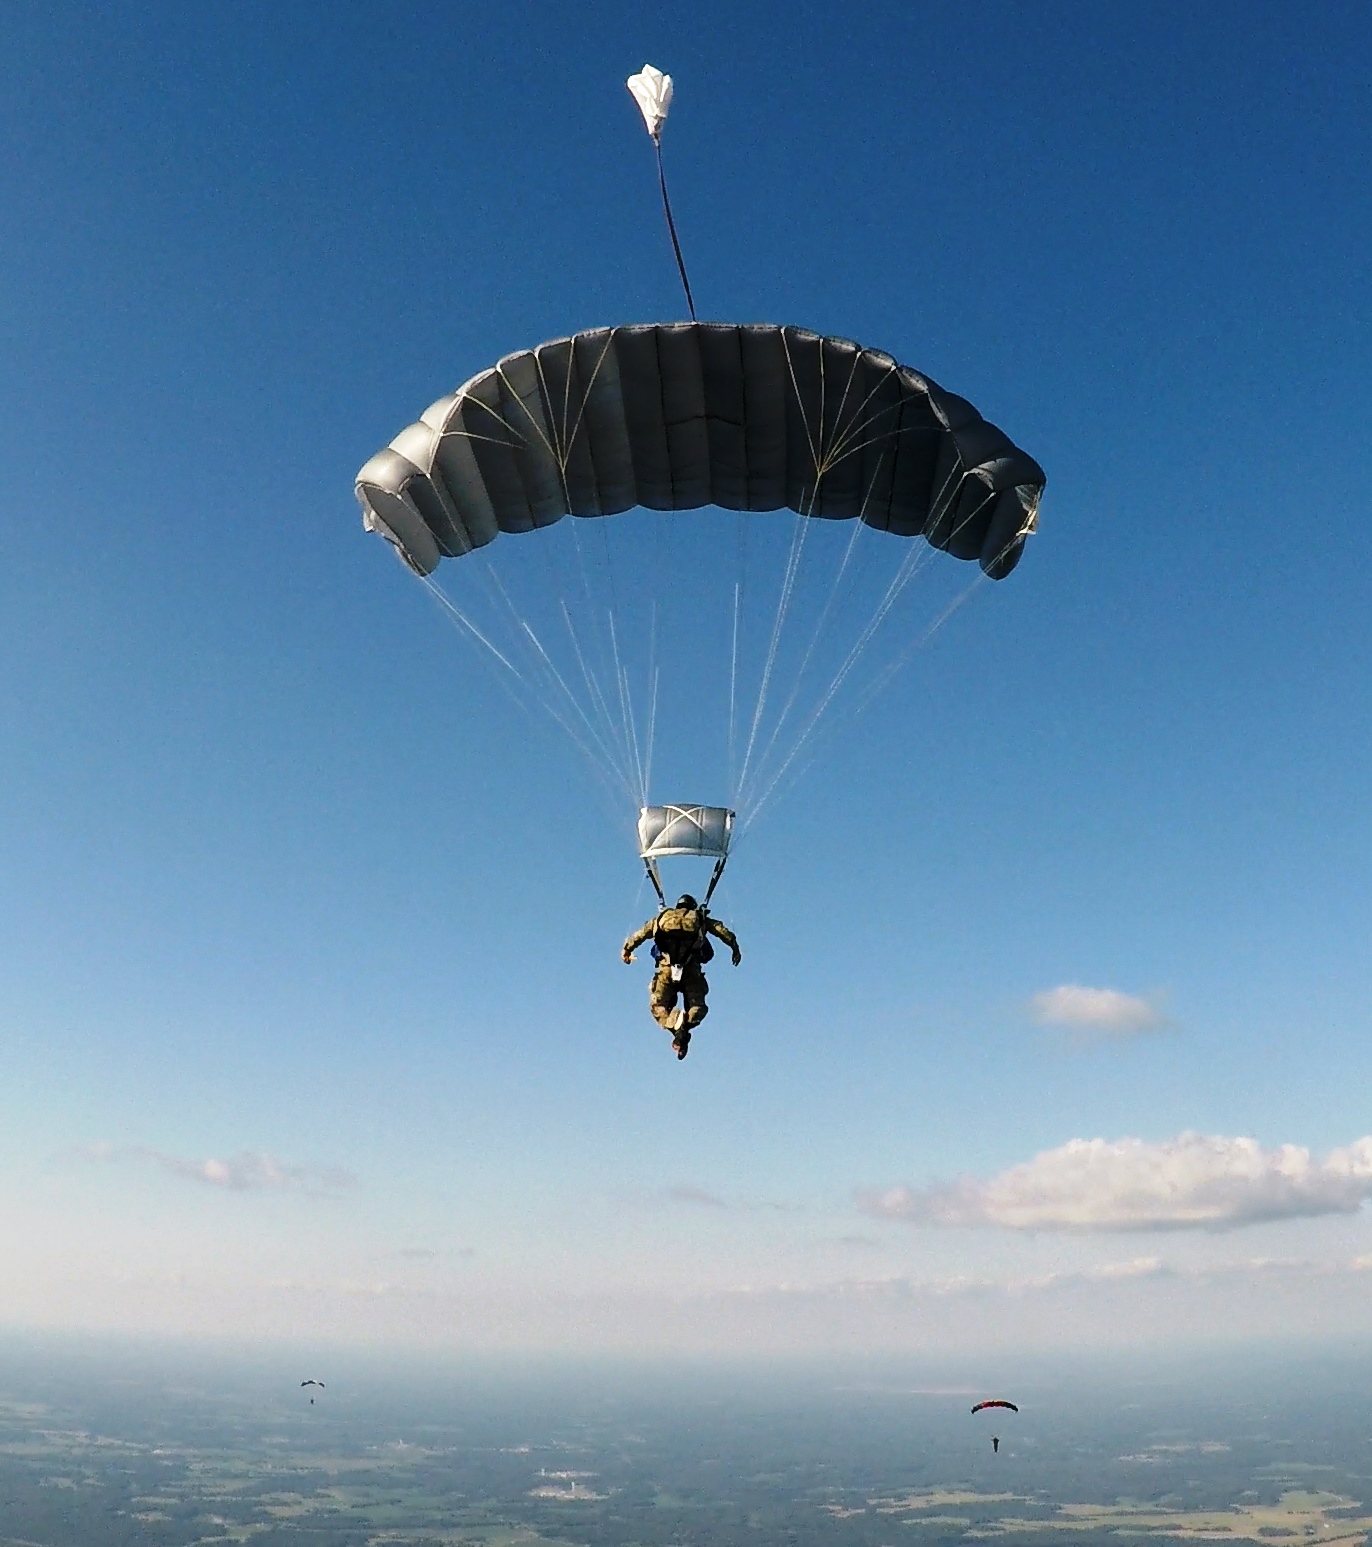 Jump Team Practices for High-Altitude Eclipse Skydives